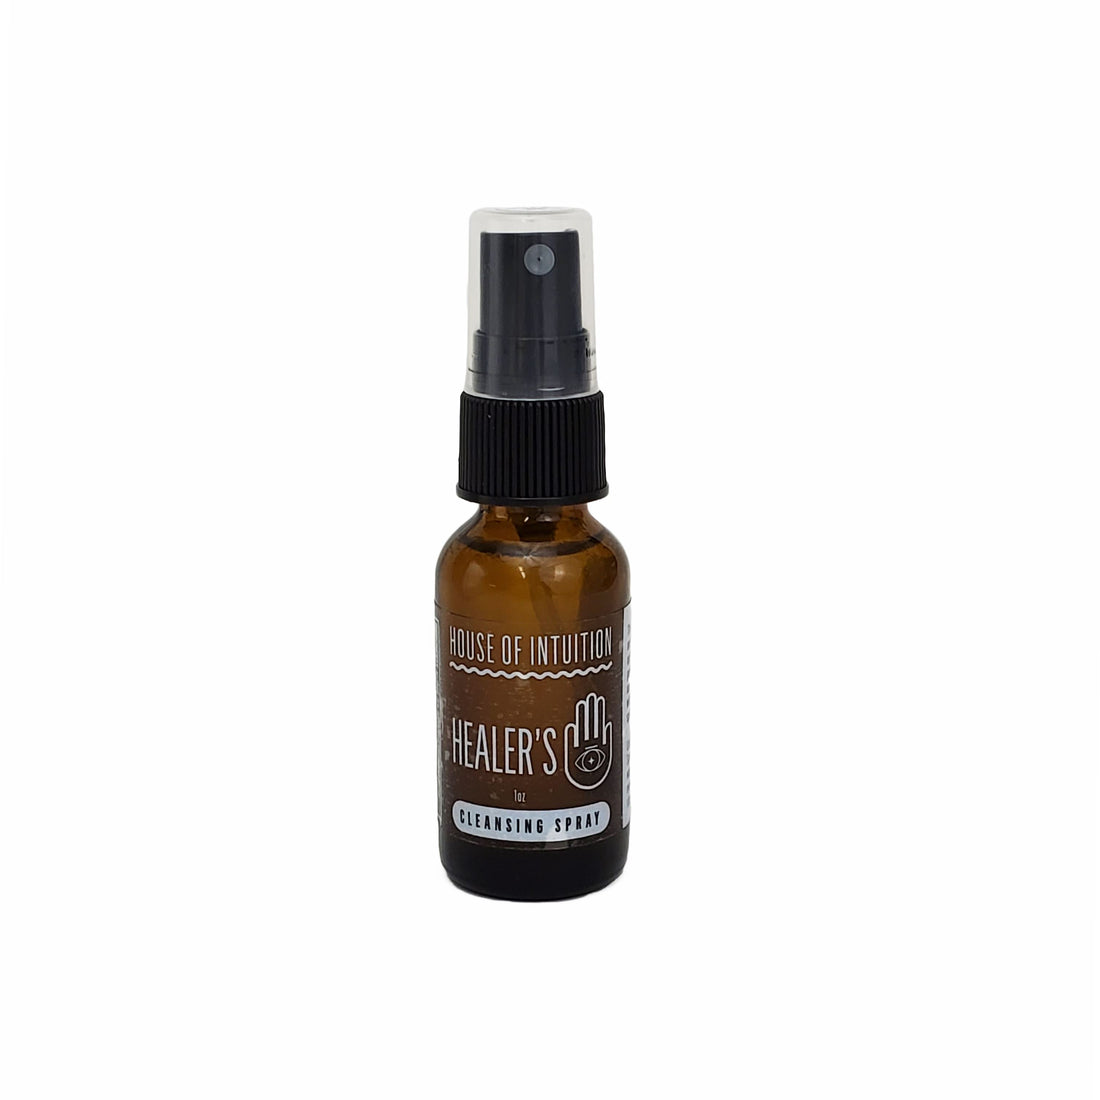 Healer's Hand Cleansing Spray Organic Sprays House of Intuition 1 oz $12.00 